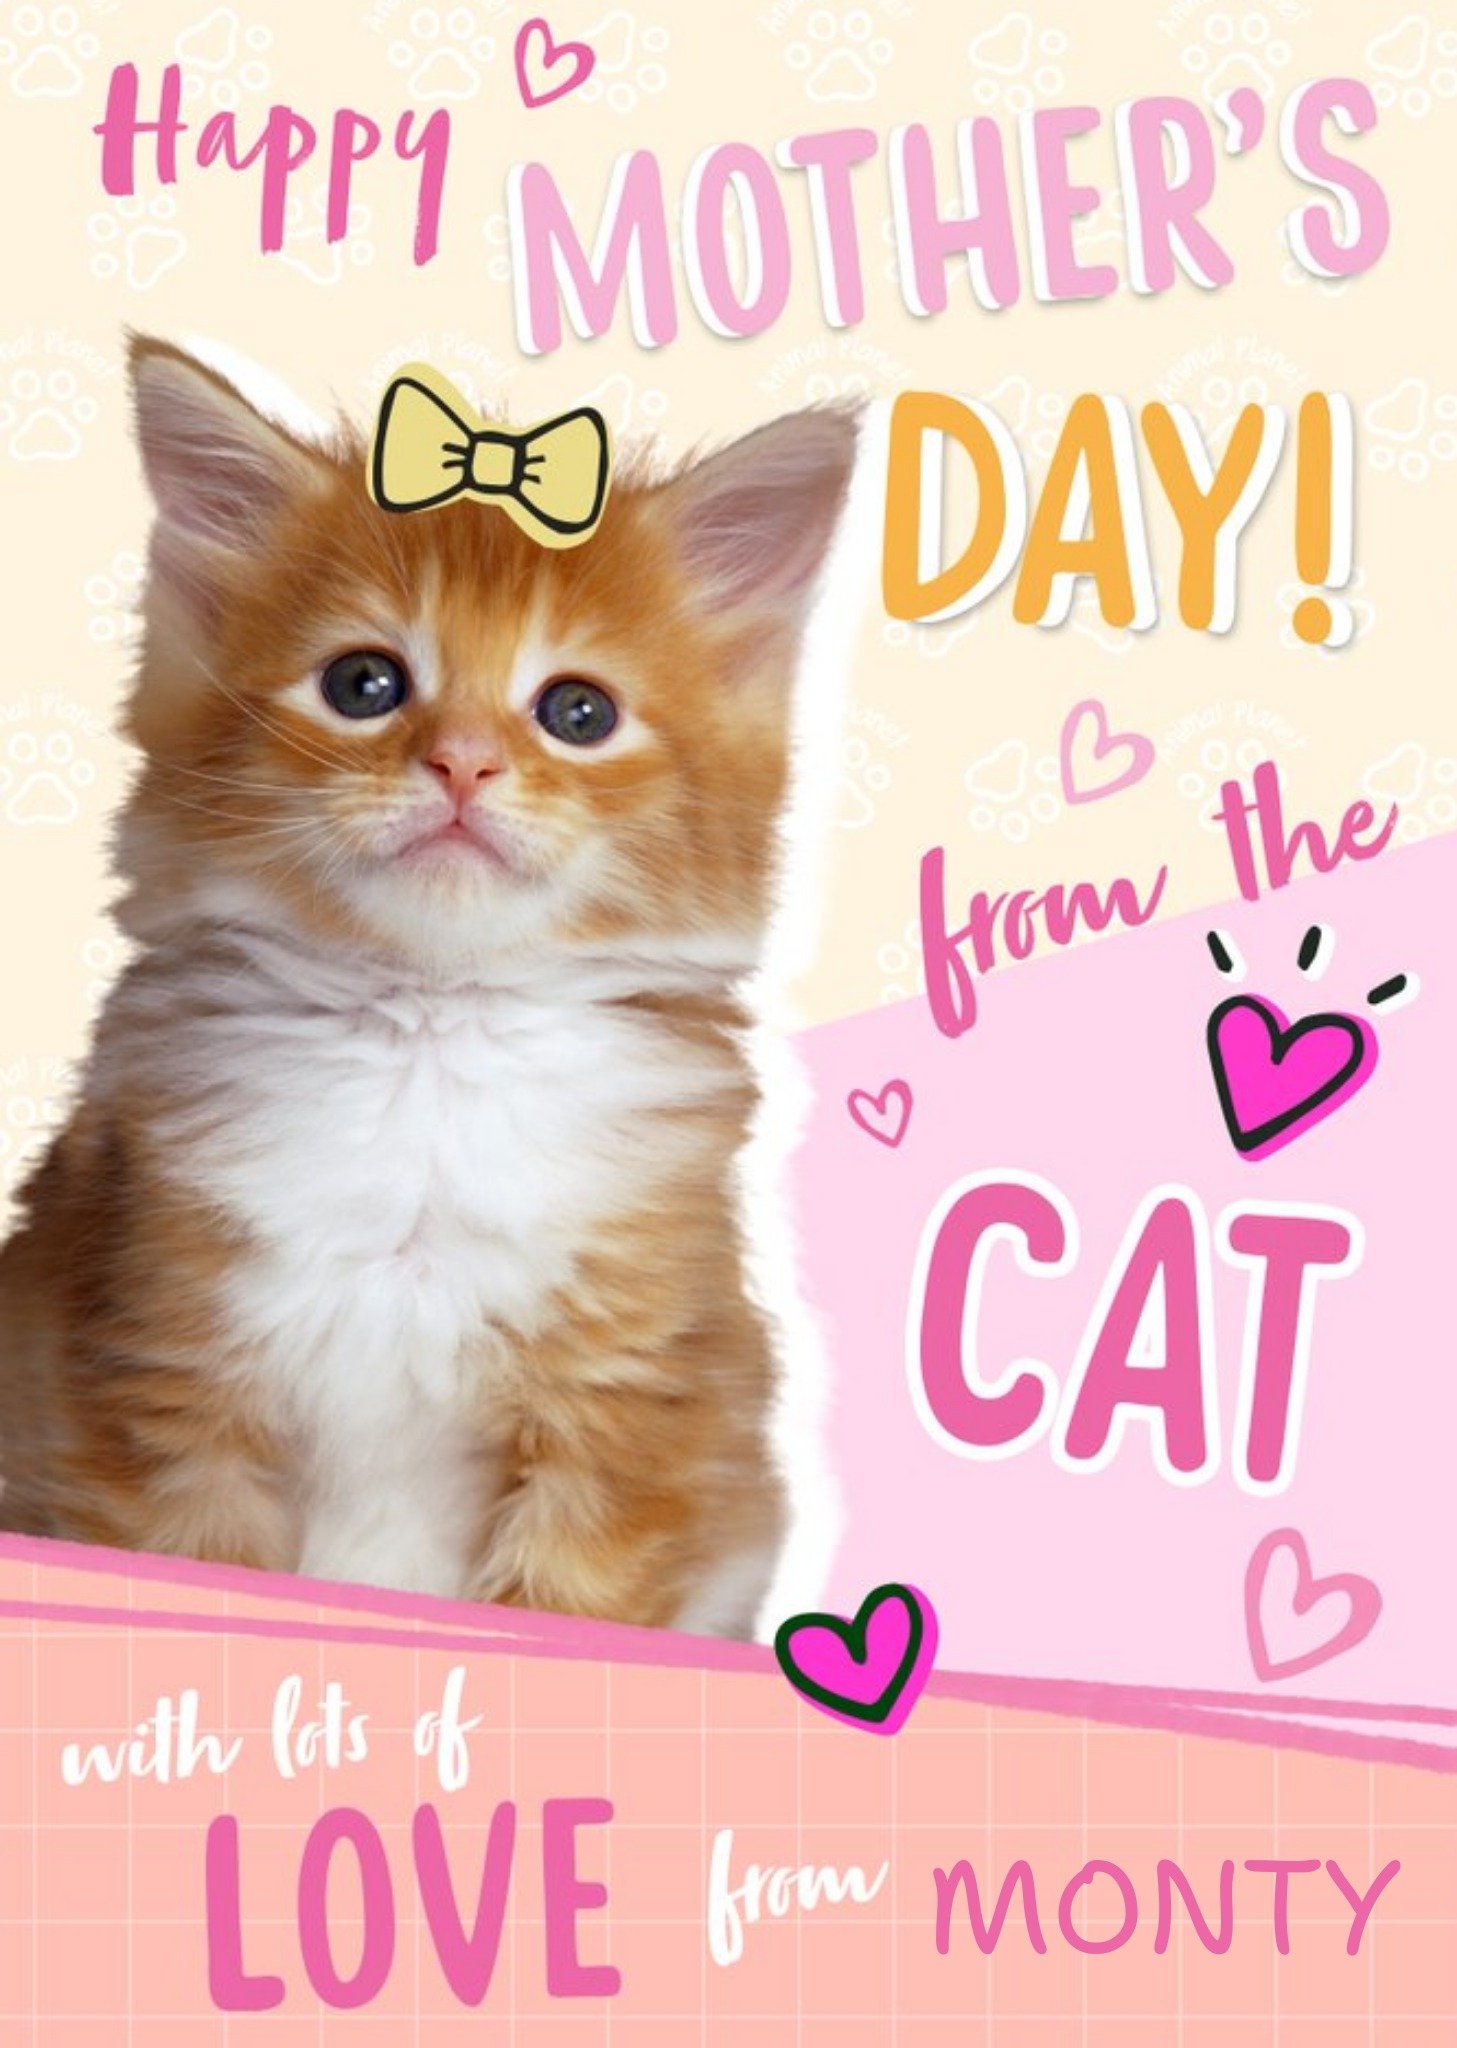 Moonpig Animal Planet Happy Mother's Day From The Cat Cute Card Ecard